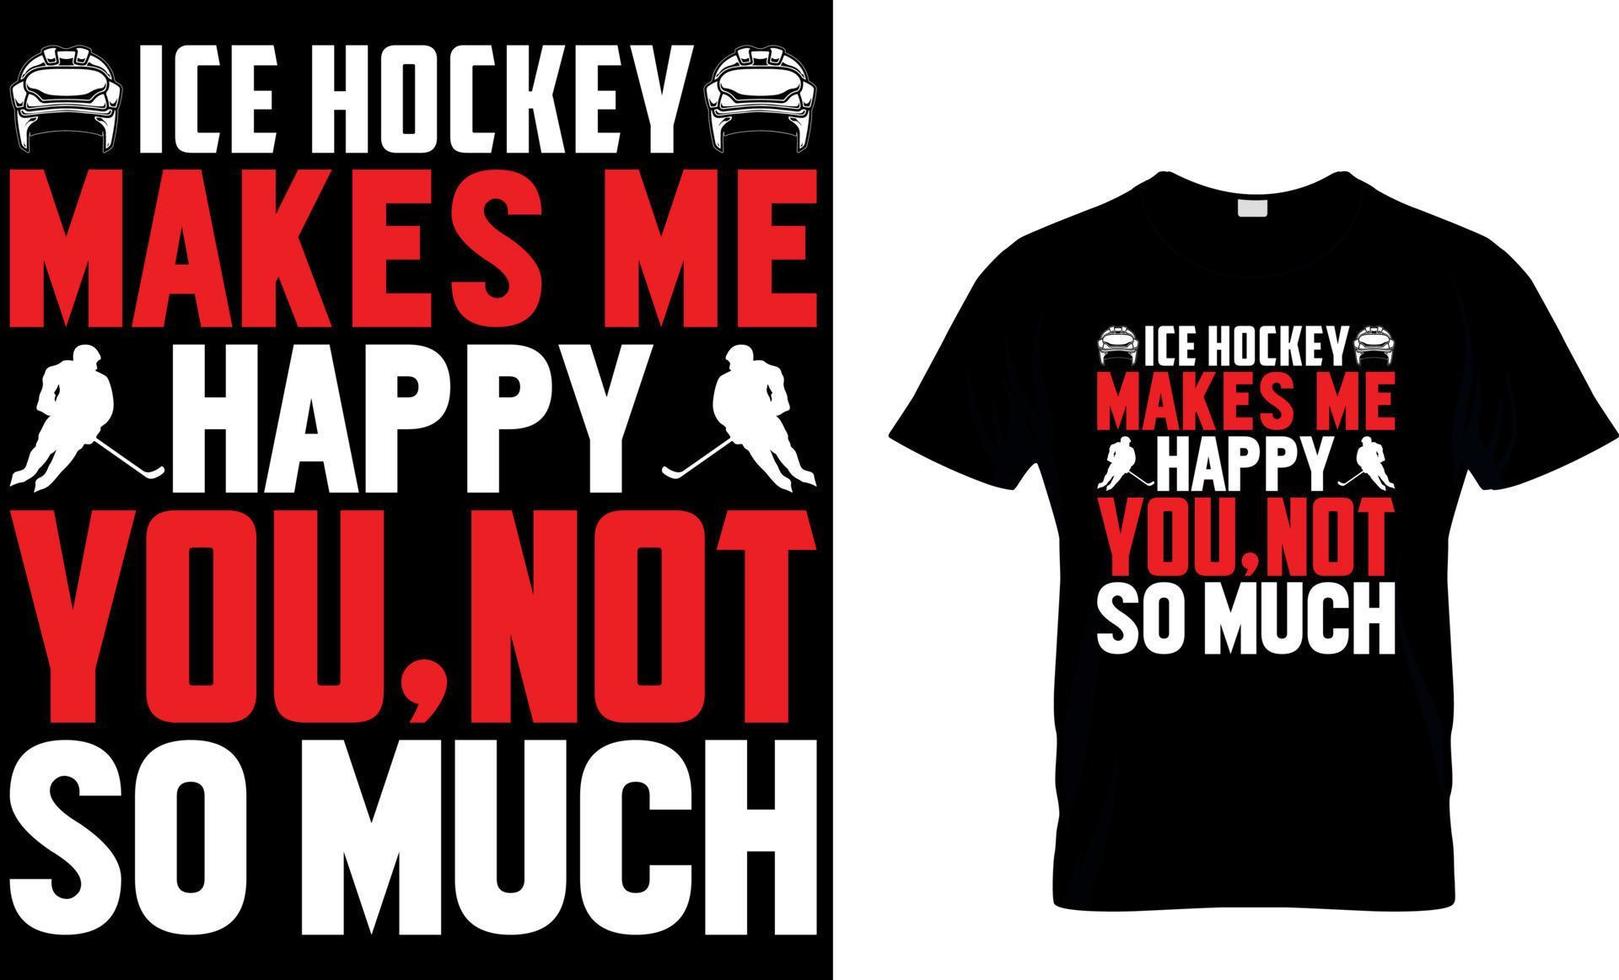 Ice hockey T-shirt design vector Graphic. ice Hockey makes me happy you not so much.